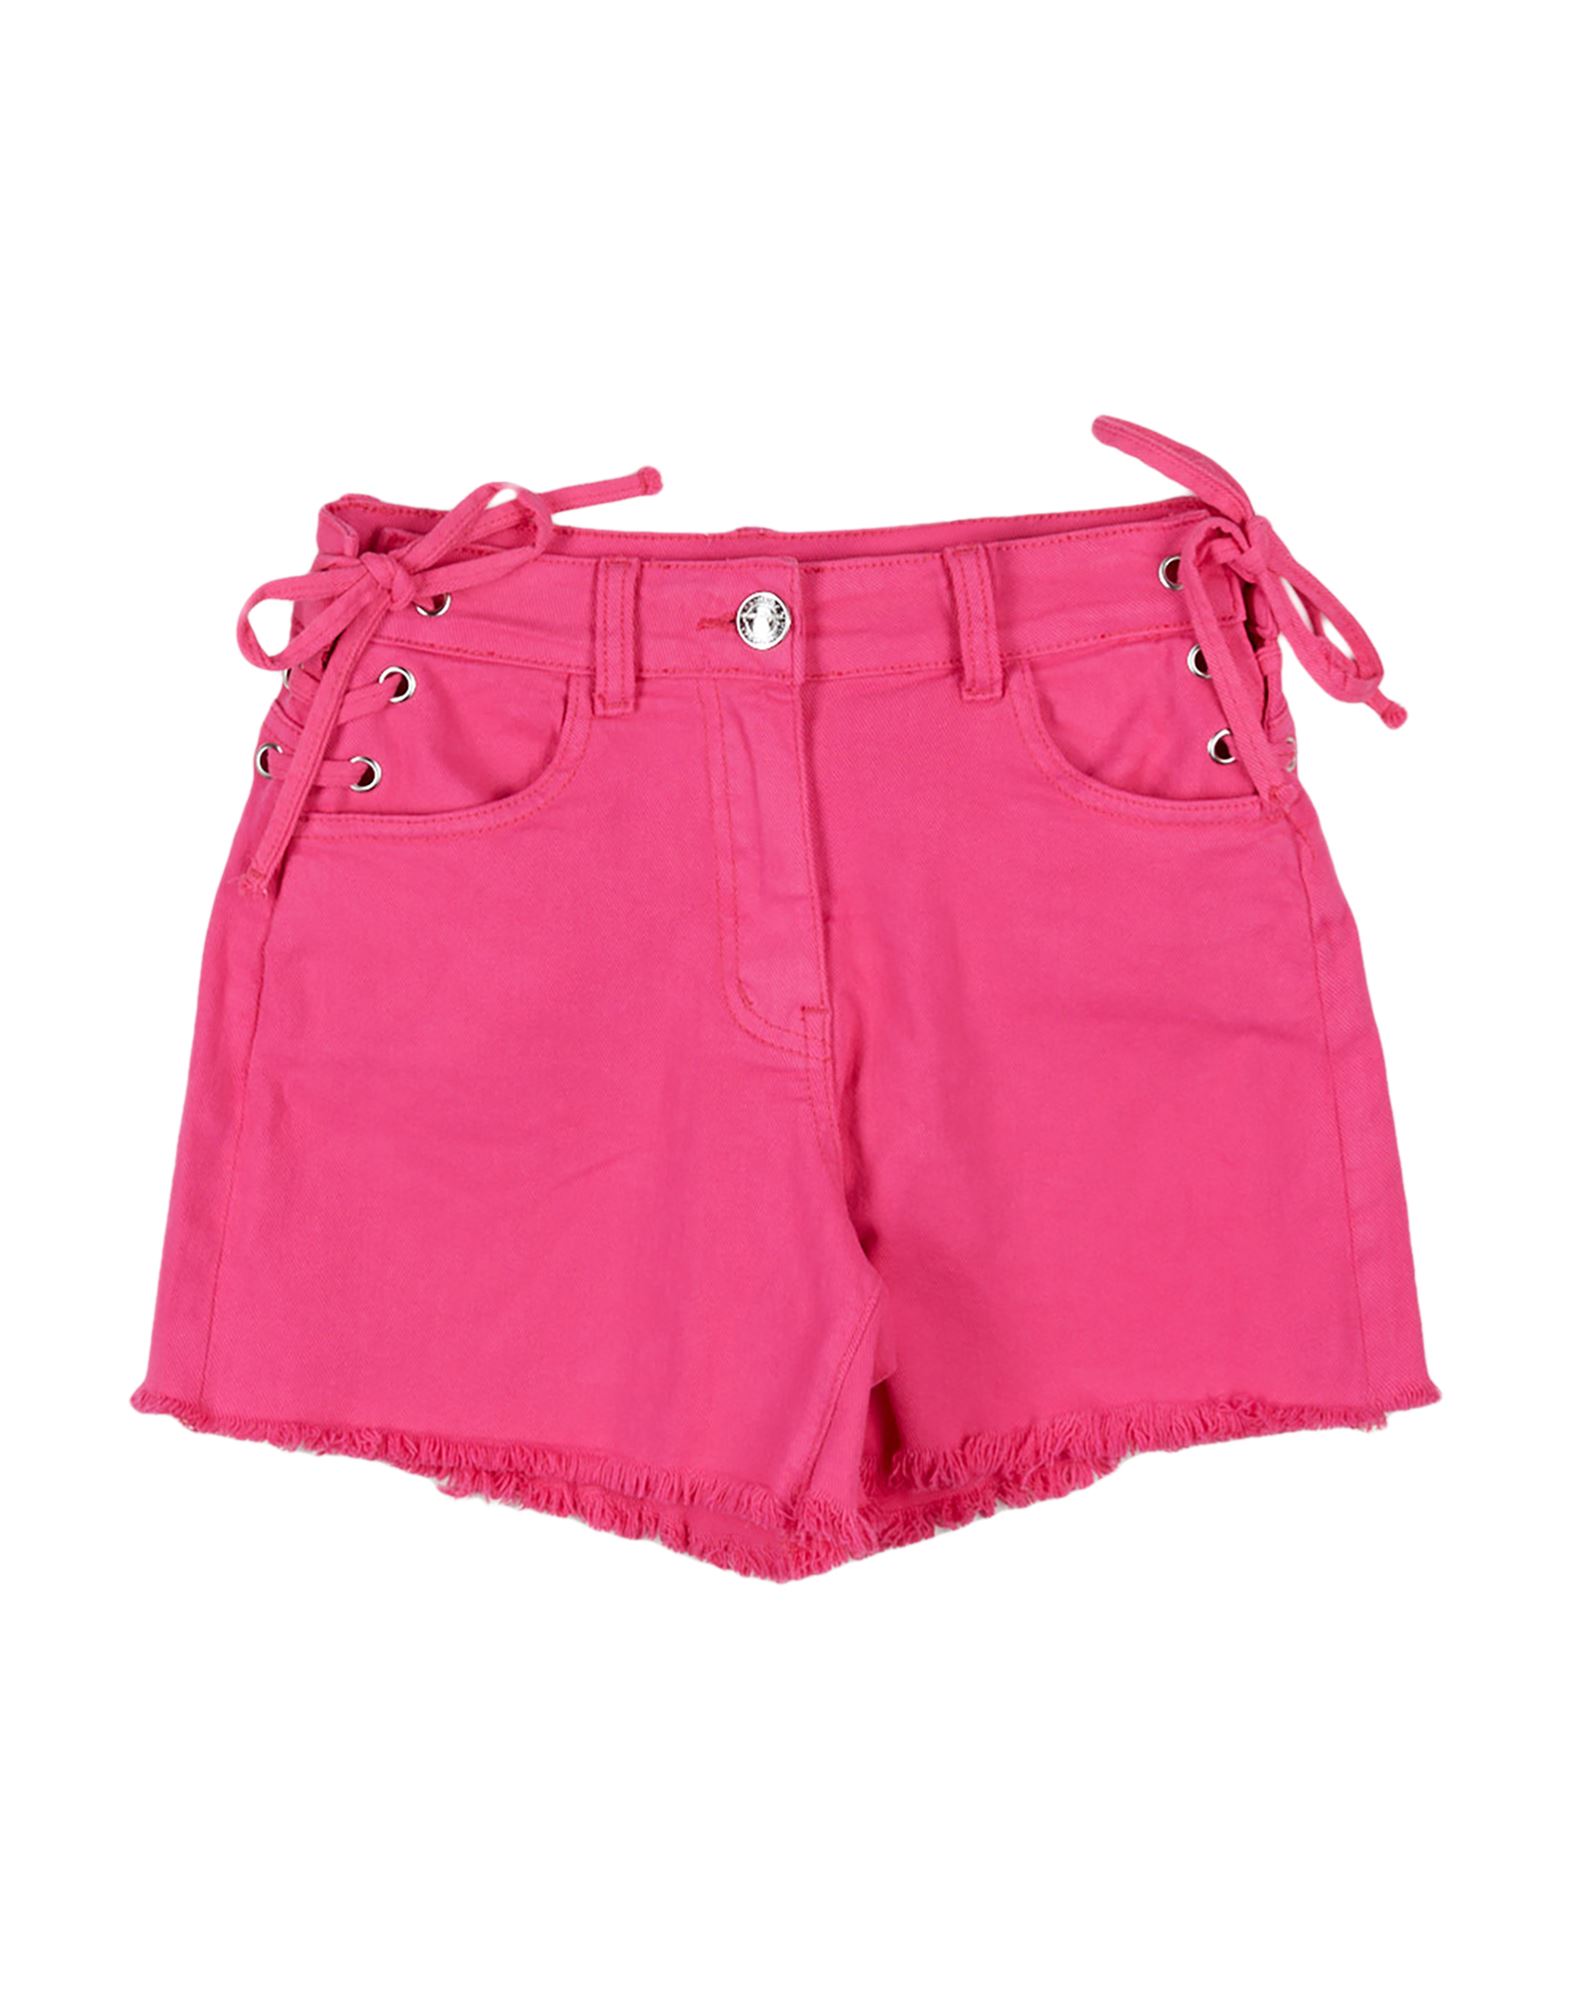 TO BE TOO Jeansshorts Kinder Fuchsia von TO BE TOO